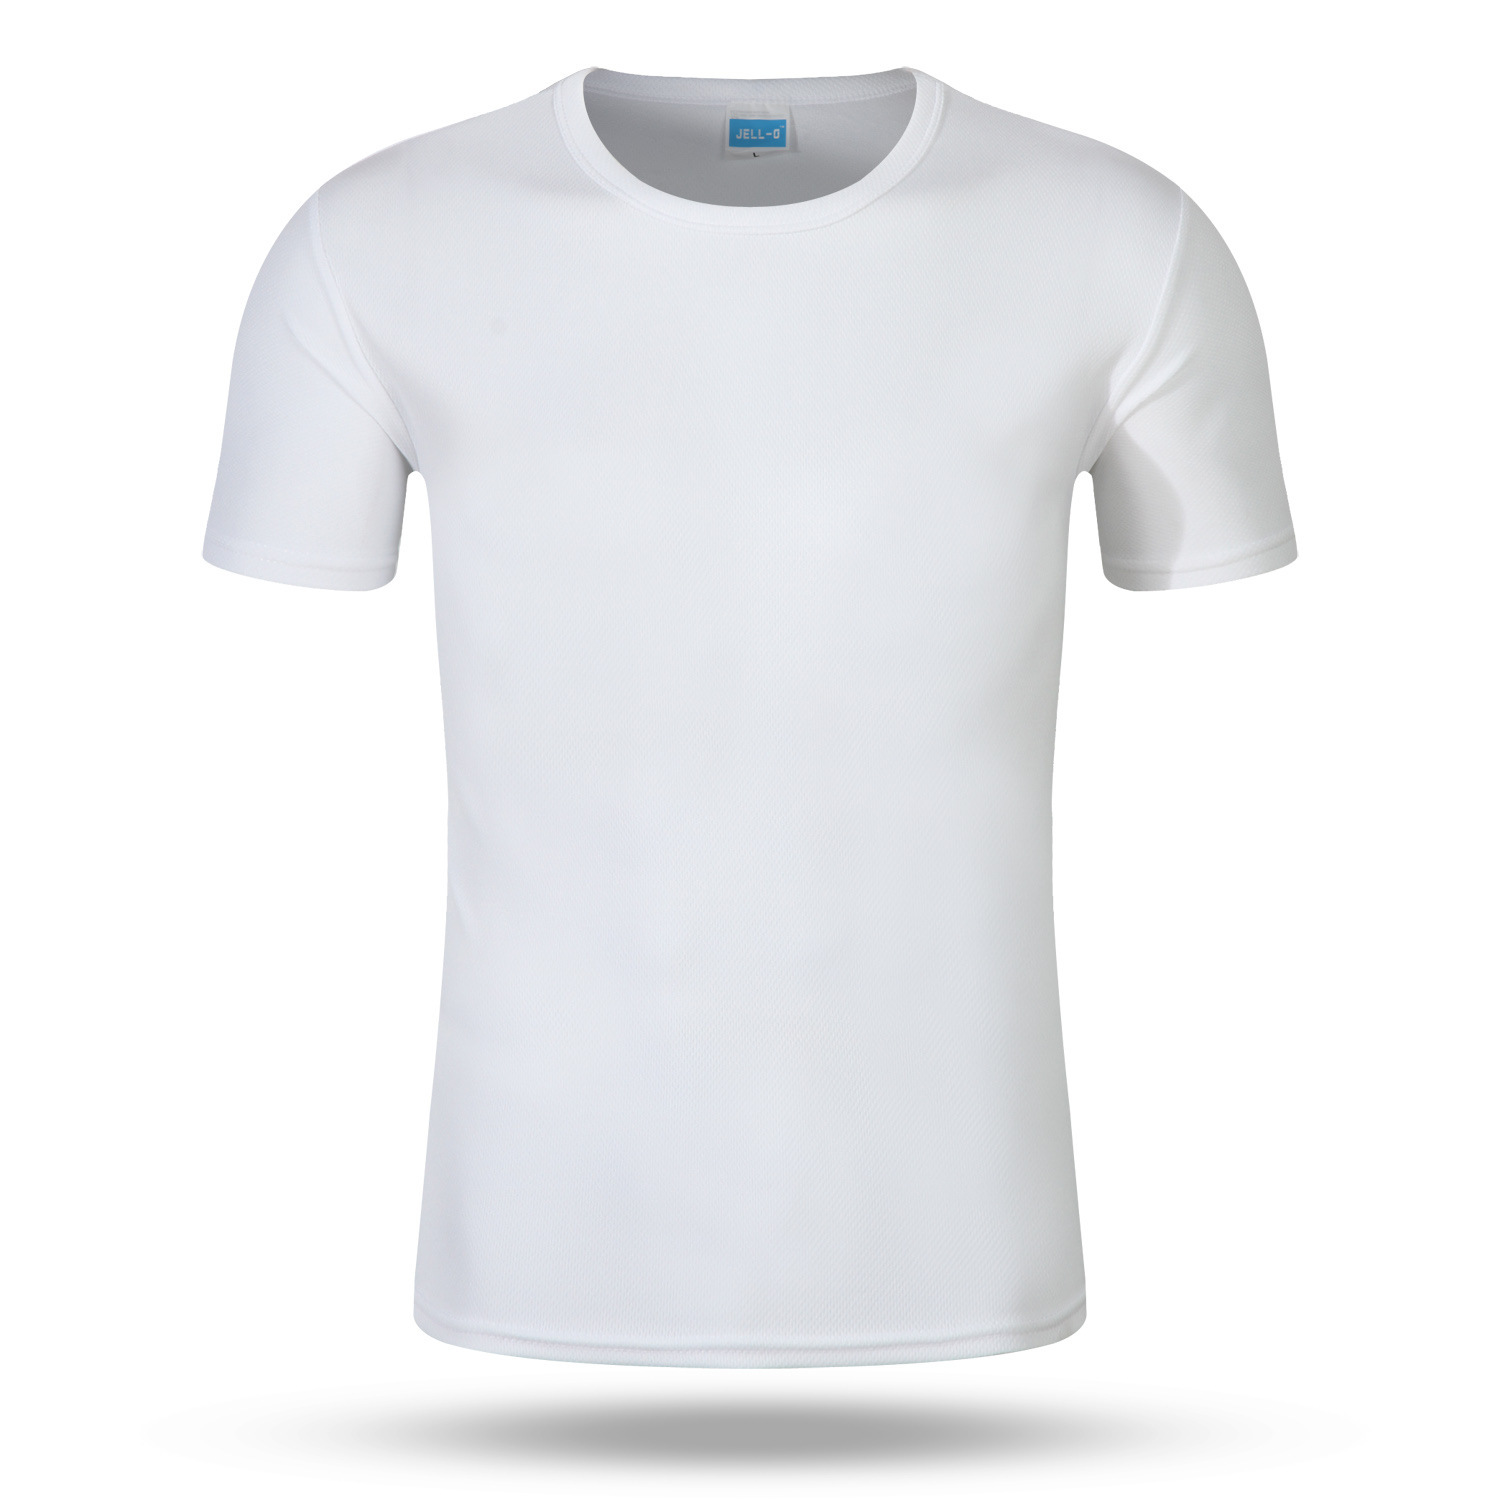 Quick-Drying T-shirt Printed Logo Company Work Clothes Enterprise Business Attire Group Building Cultural Shirt Work Wear Clothing Custom Short Sleeve Summer